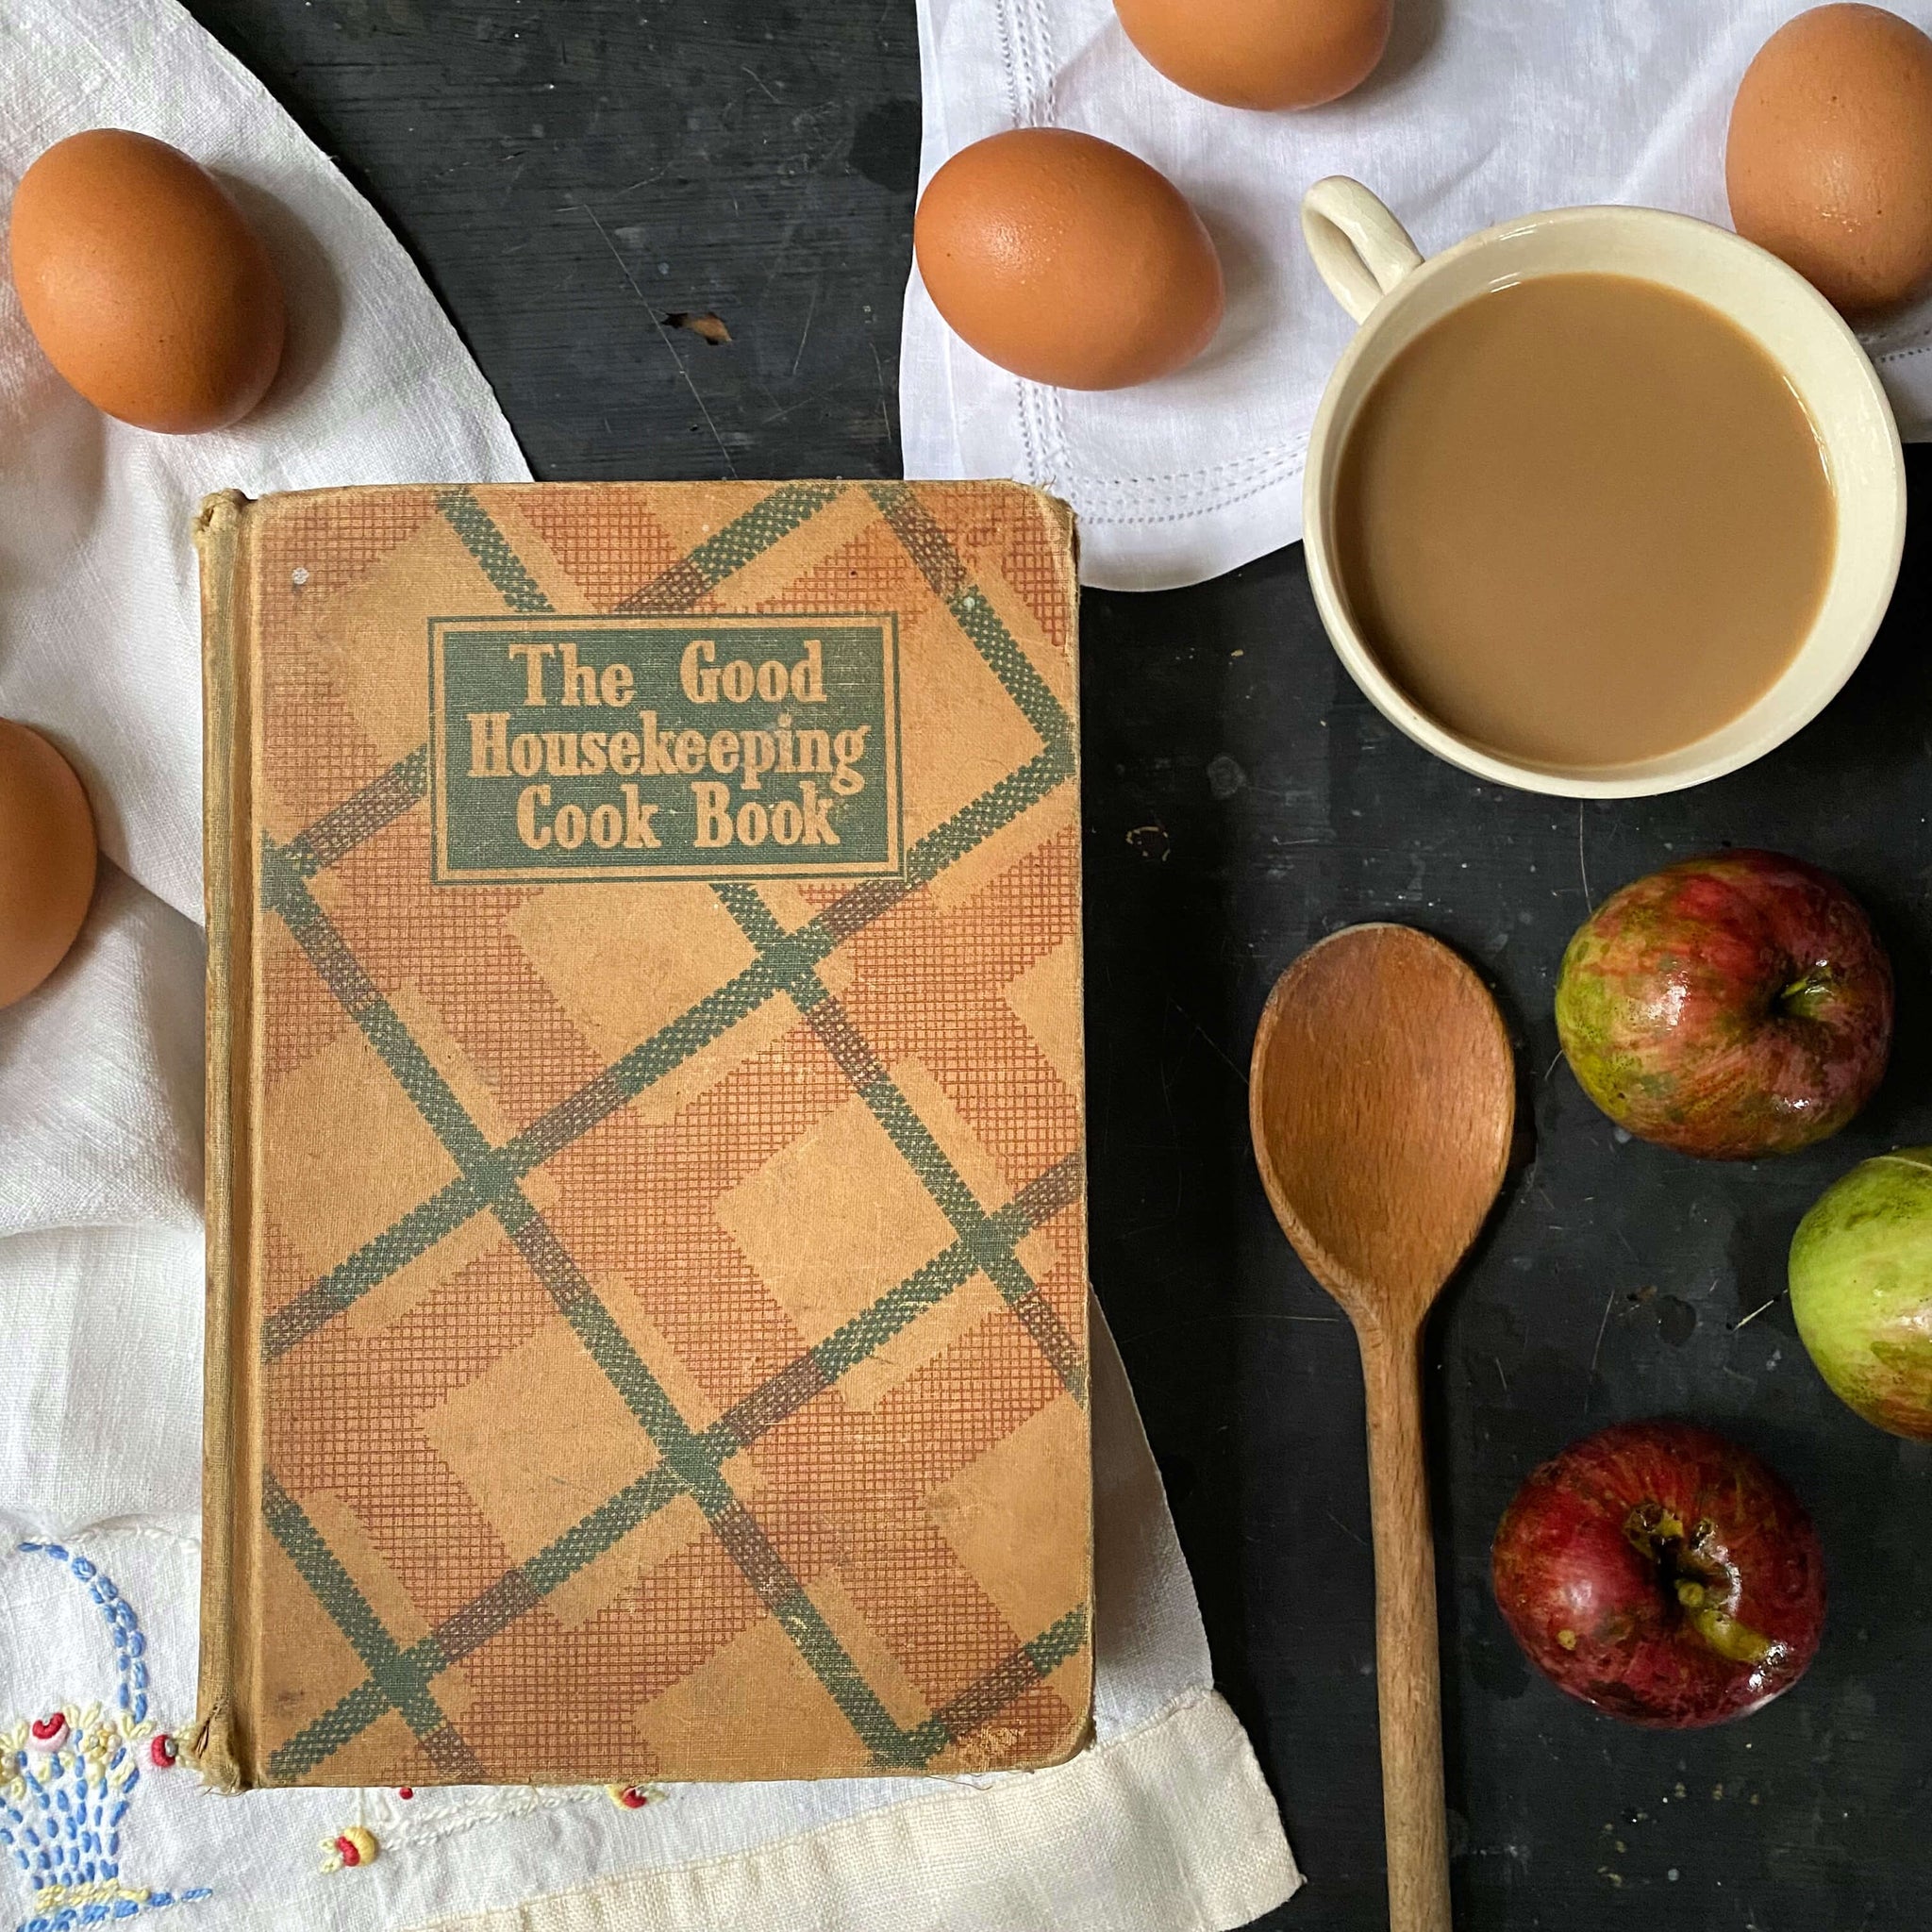 The Good Housekeeping Cook Book -1943 Wartime Edition with Handwritten – In  The Vintage Kitchen Shop